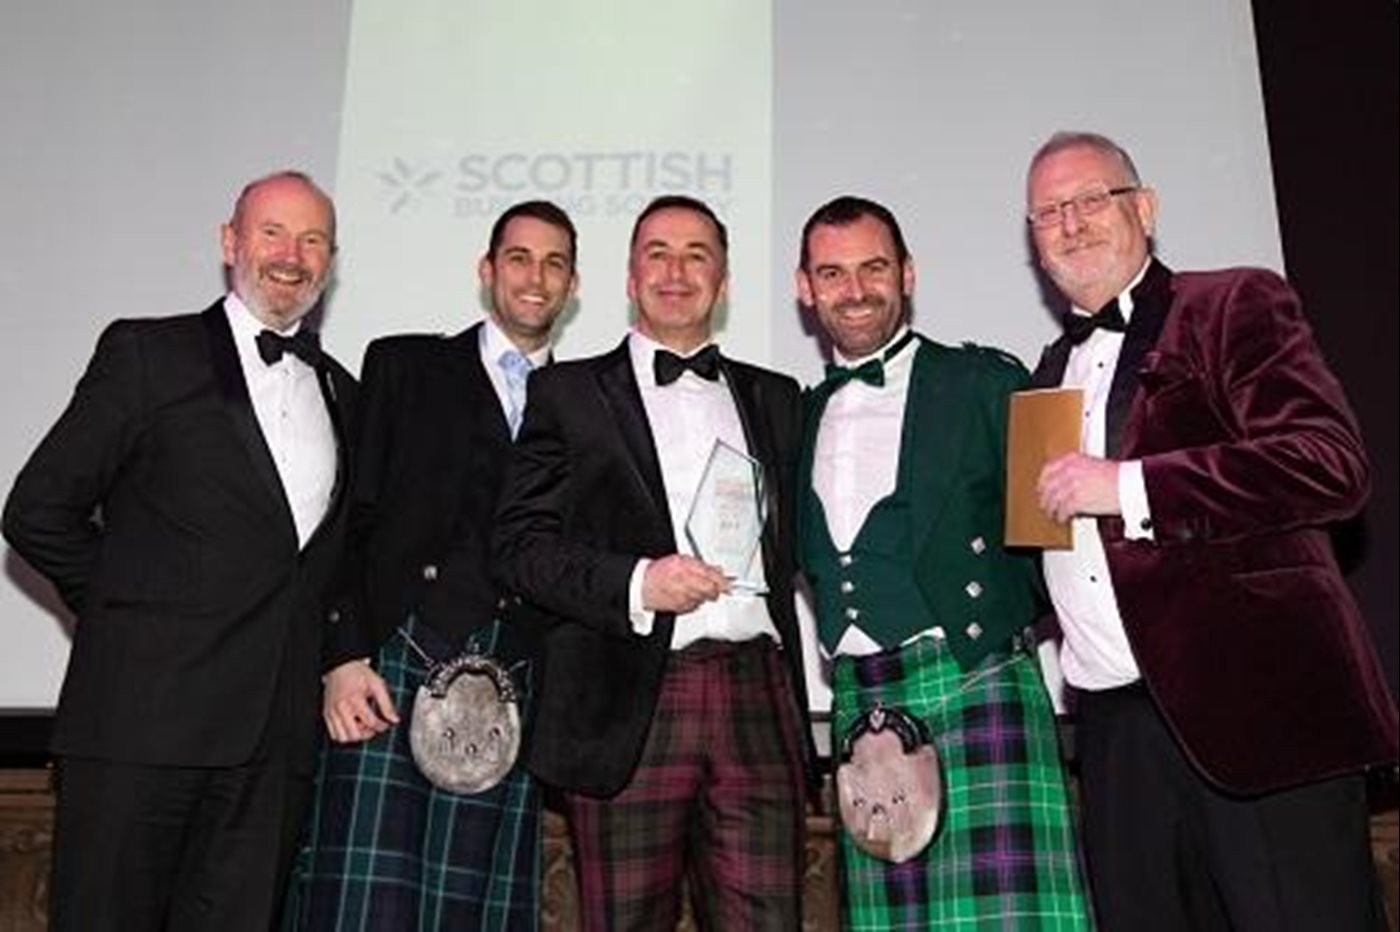 BUILDING SOCIETY OF THE YEAR SCOTTISH